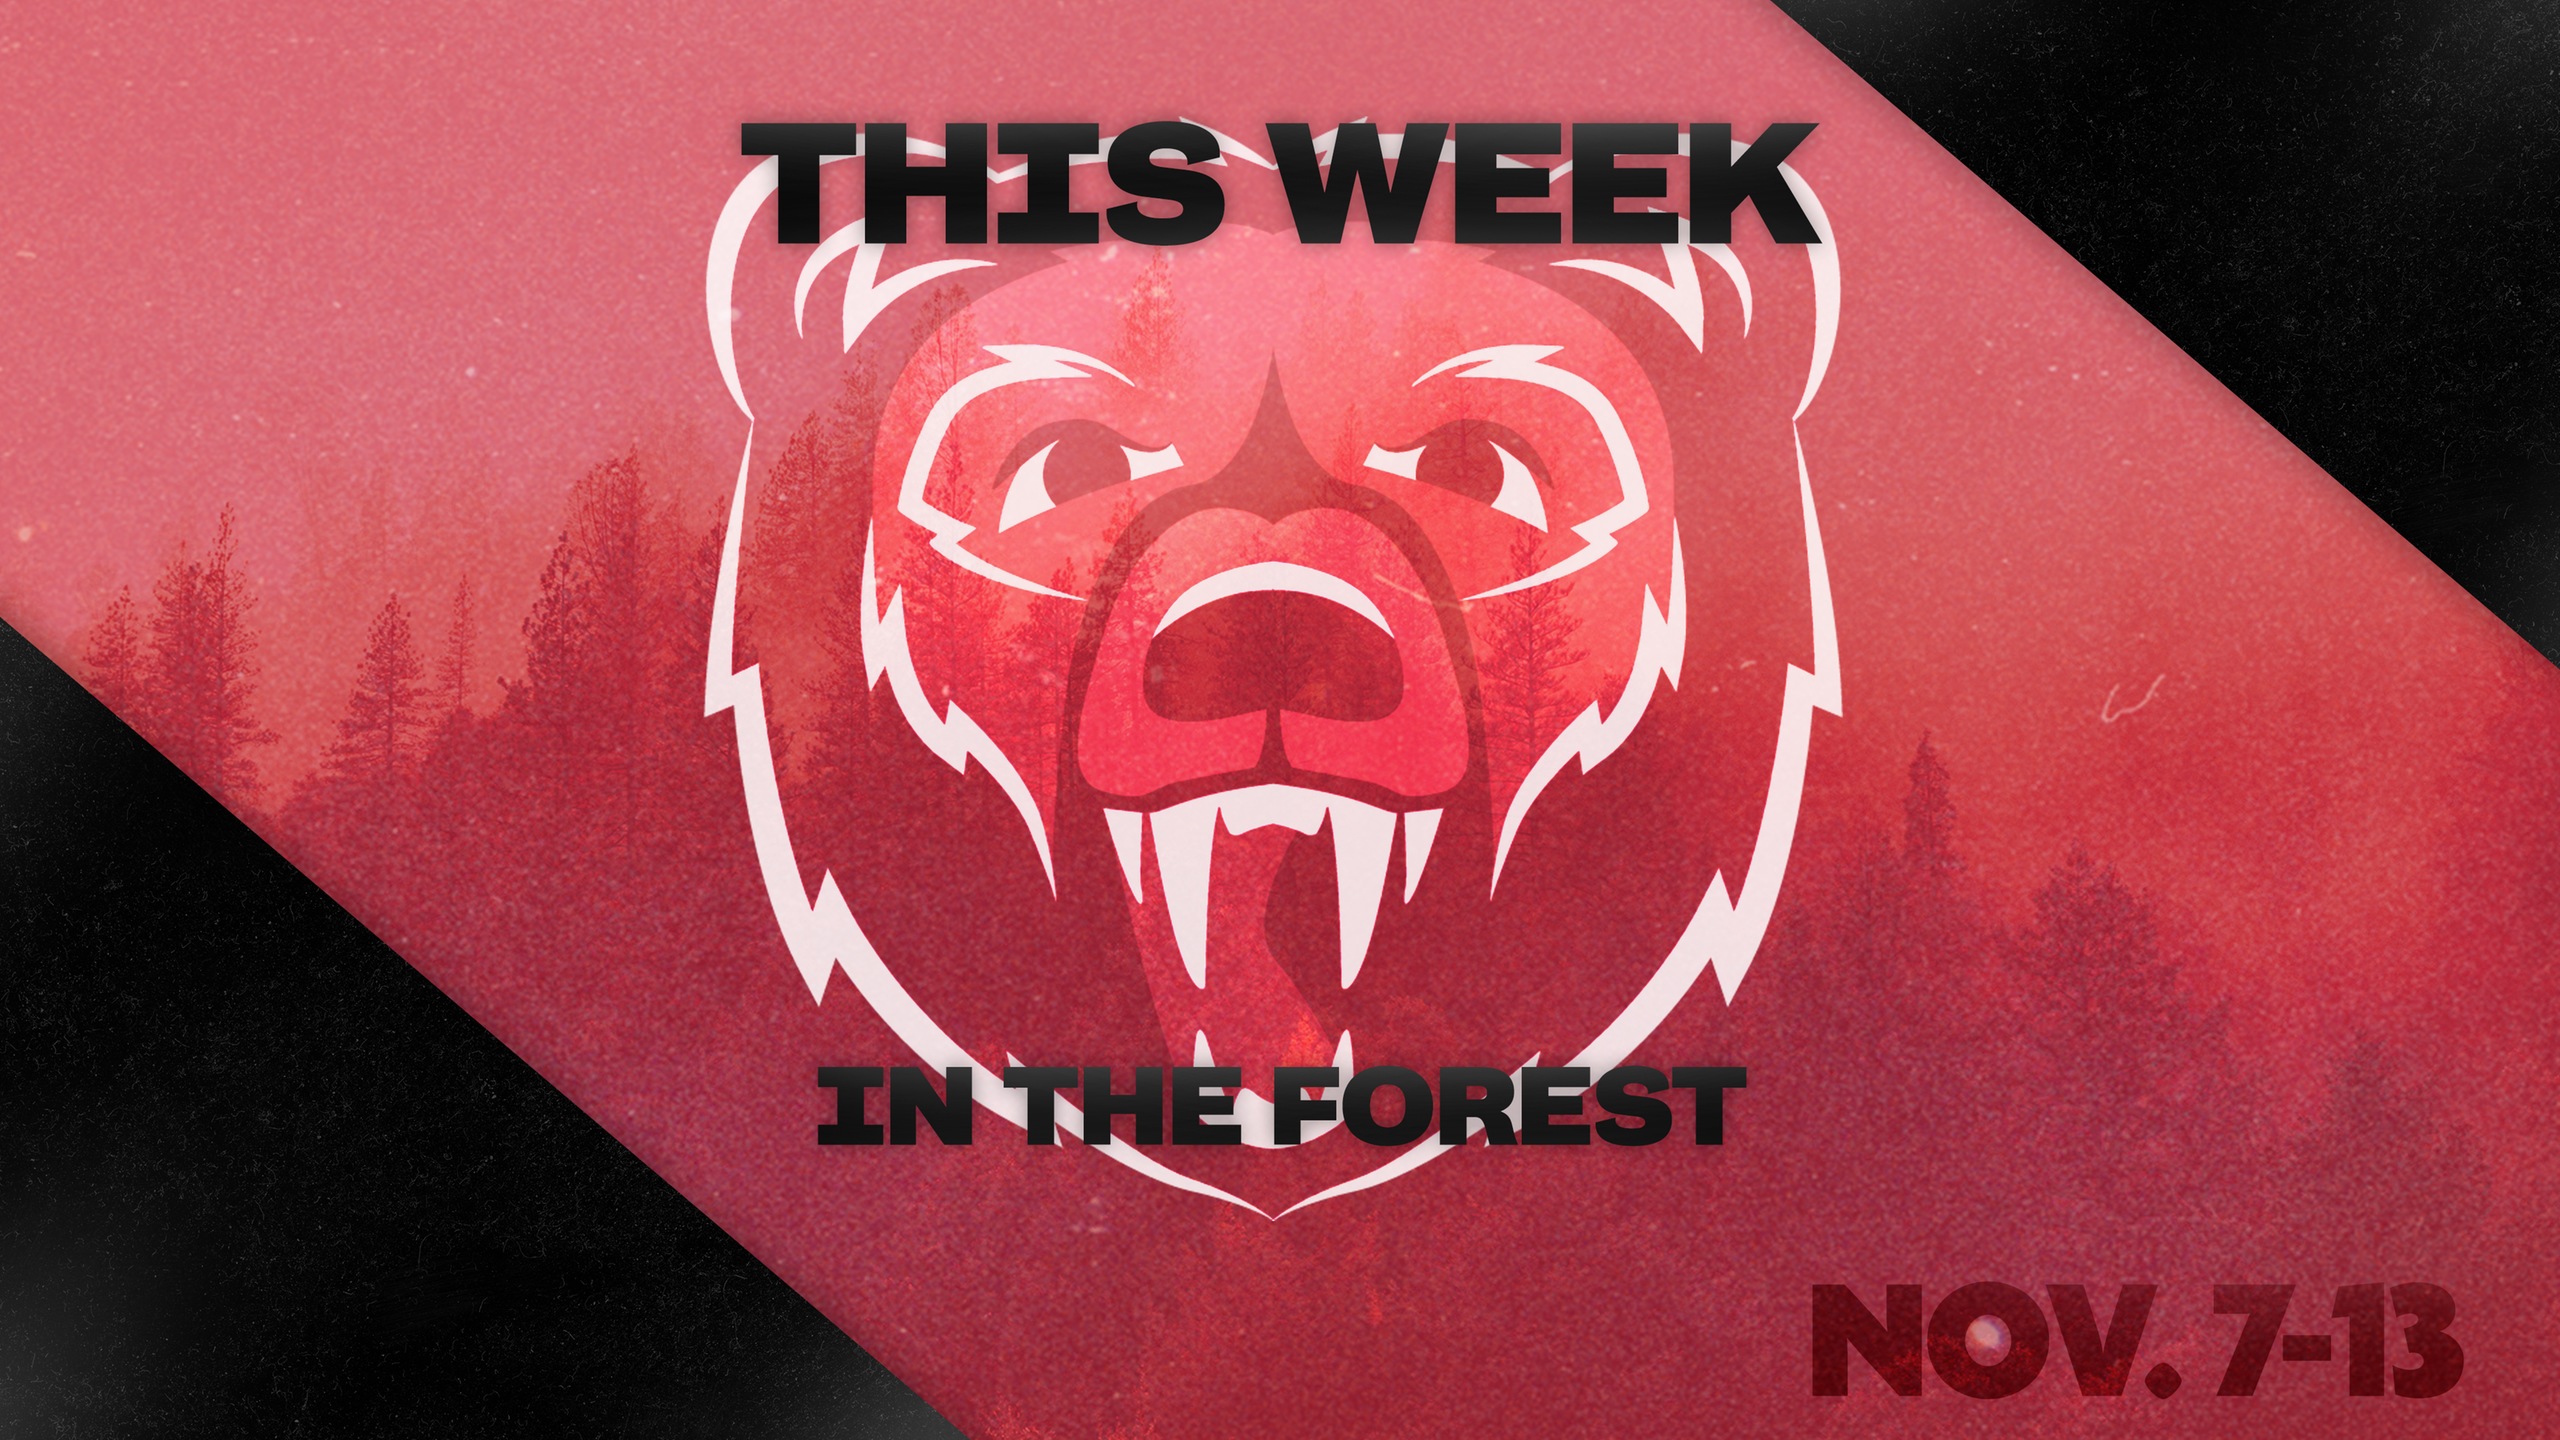 This Week in The Forest Nov. 7-13